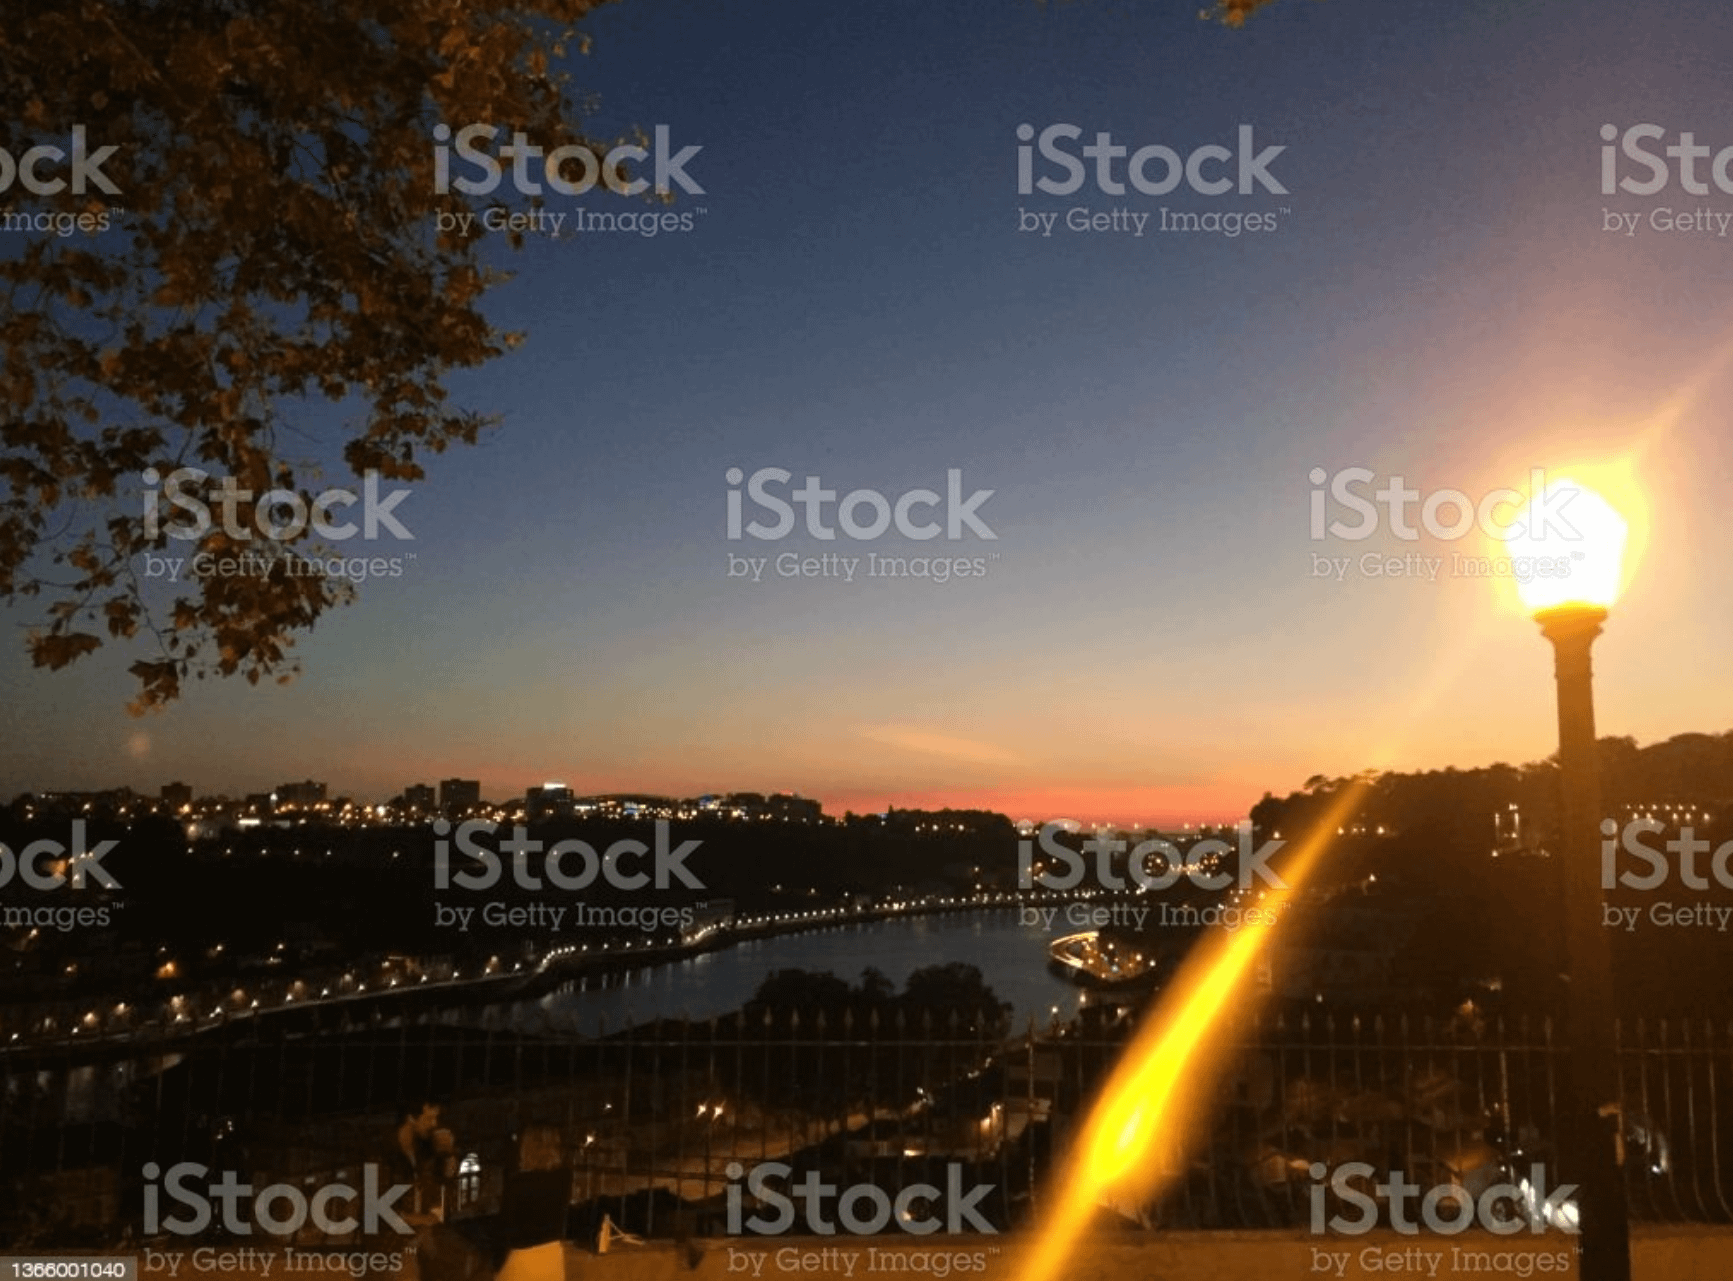 iStock watermarks images to prevent content scraping.